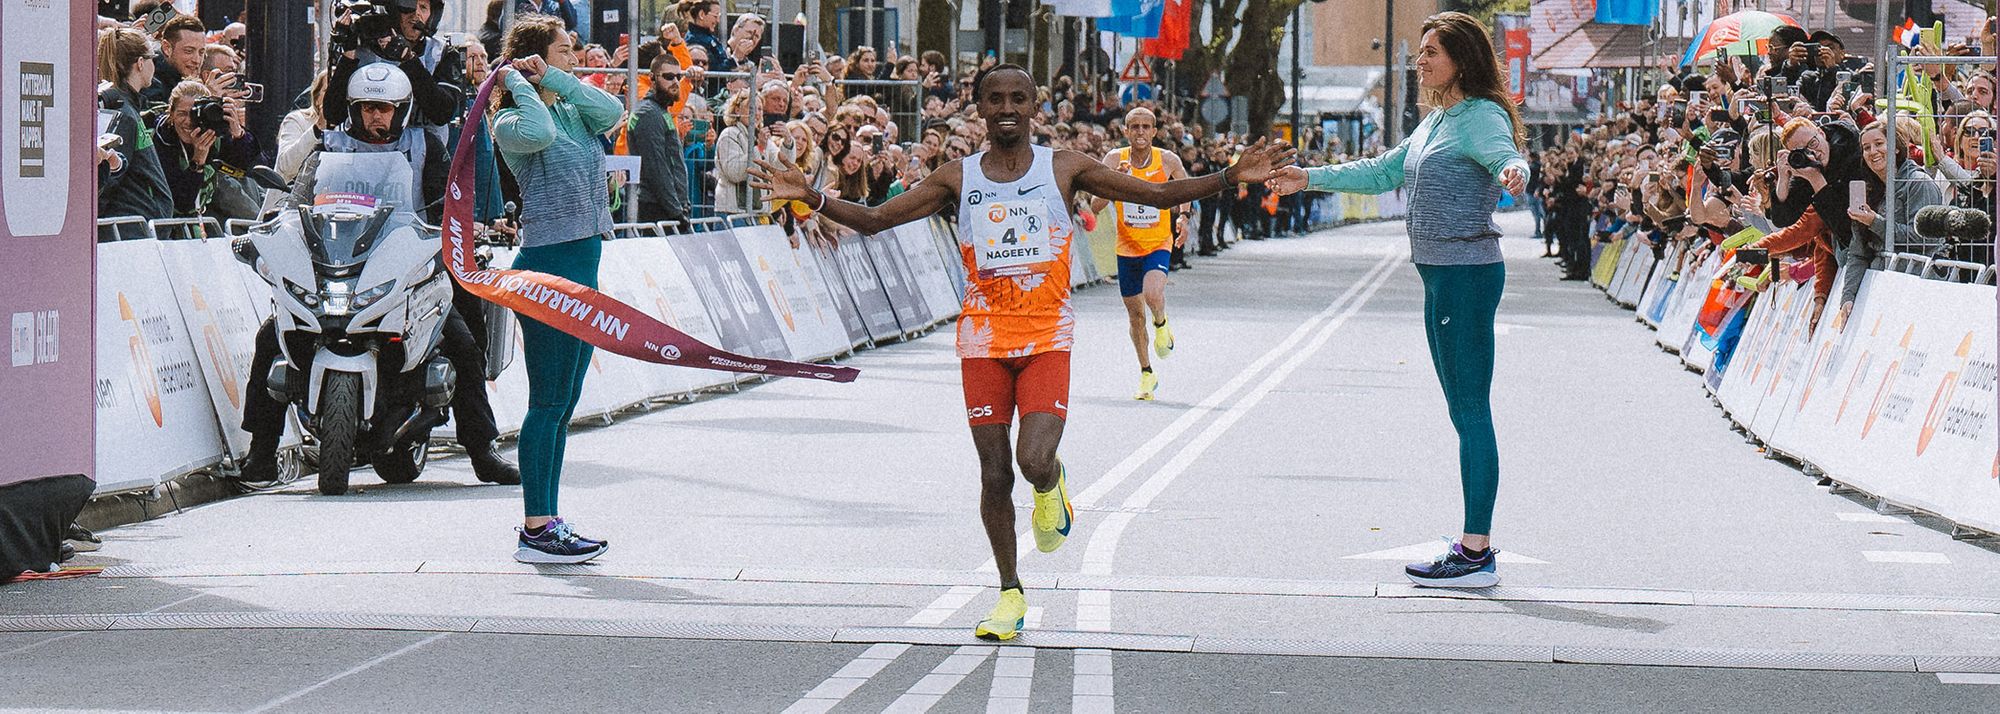 Abdi Nageeye improved his own Dutch record to 2:04:45 and Ethiopia’s Ashete Bekere clocked 2:19:30 to win the World Athletics Gold Label road race